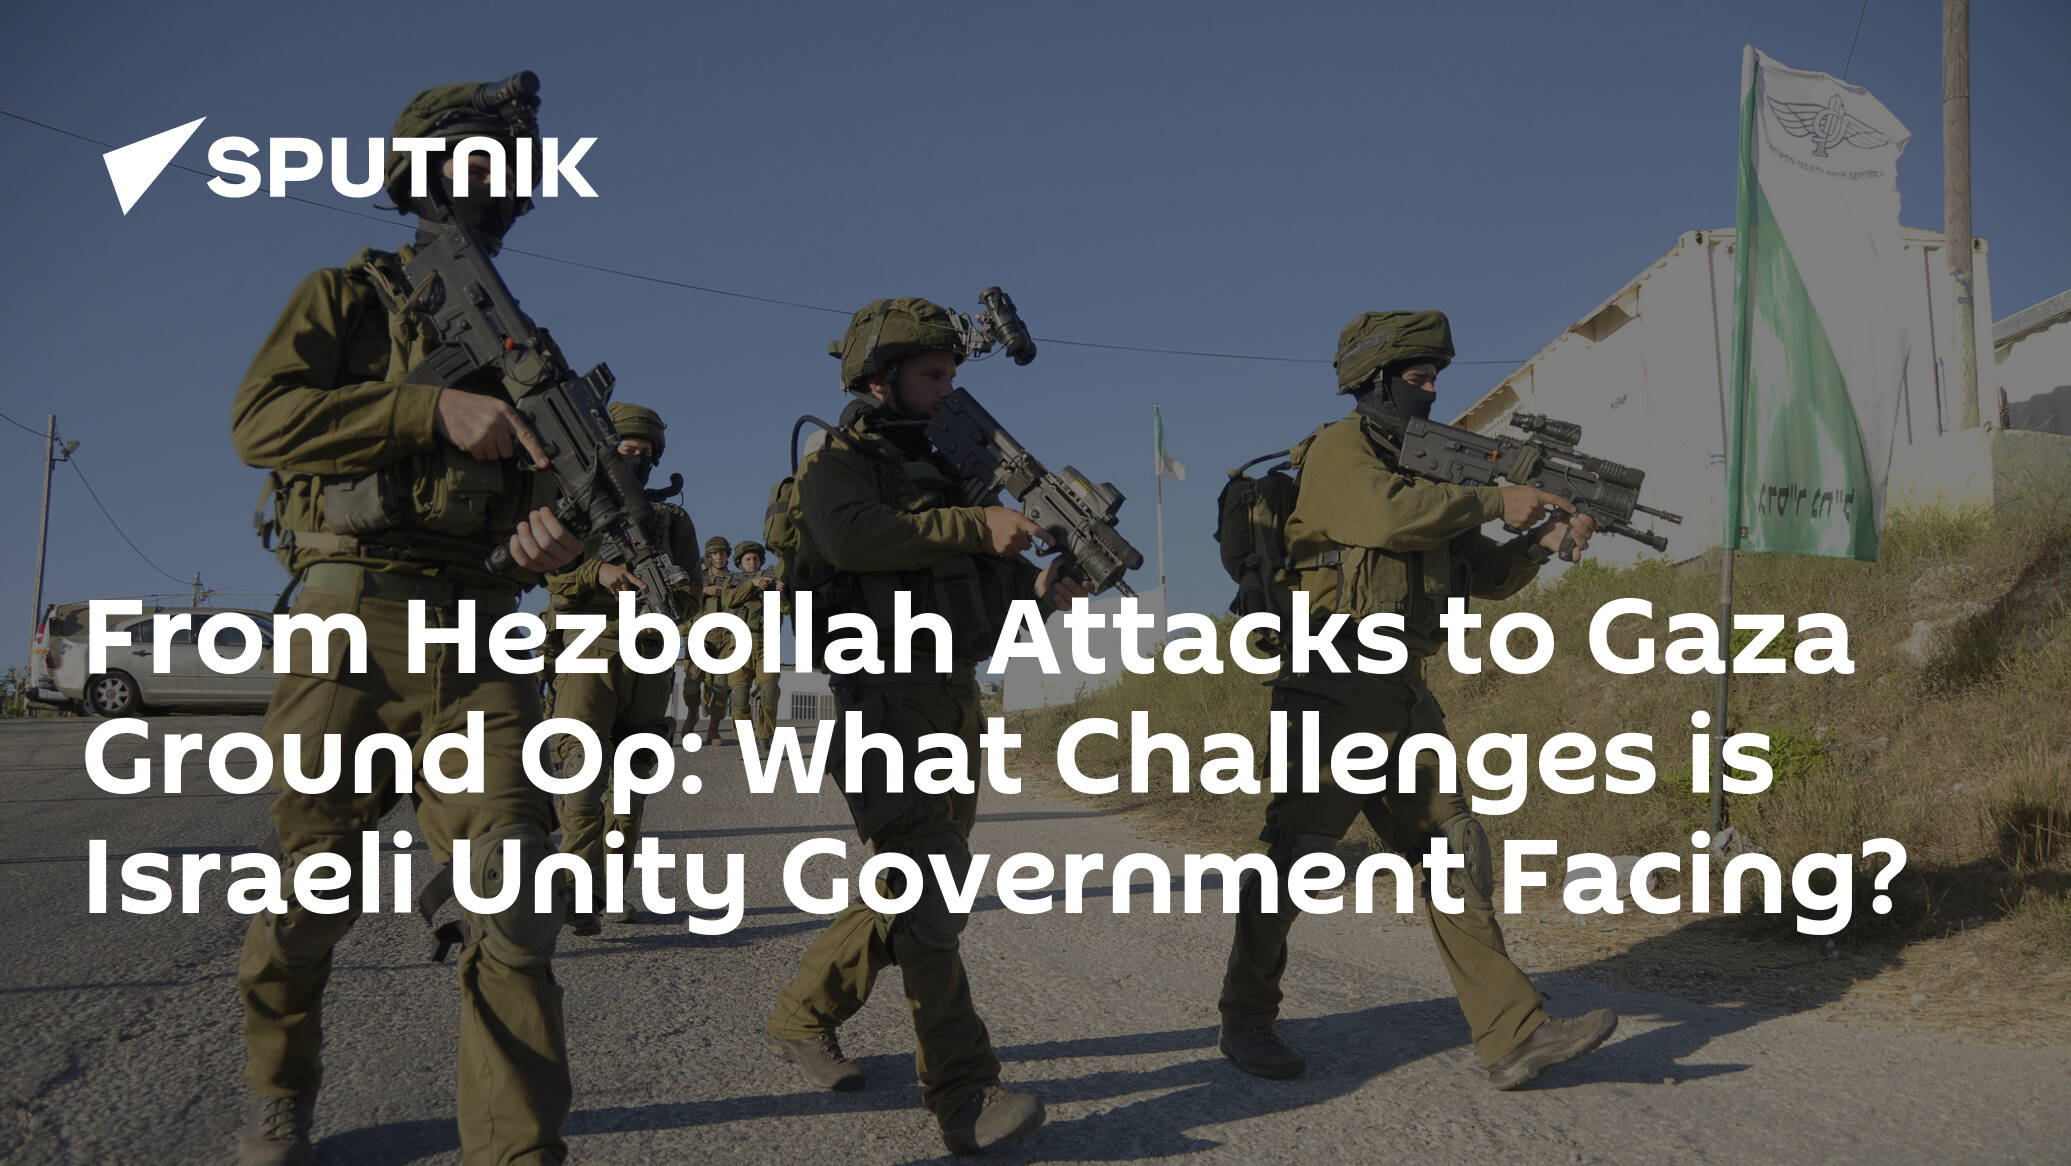 From Hezbollah Attacks to Gaza Ground Op: What Challenges is Israeli Unity Government Facing?